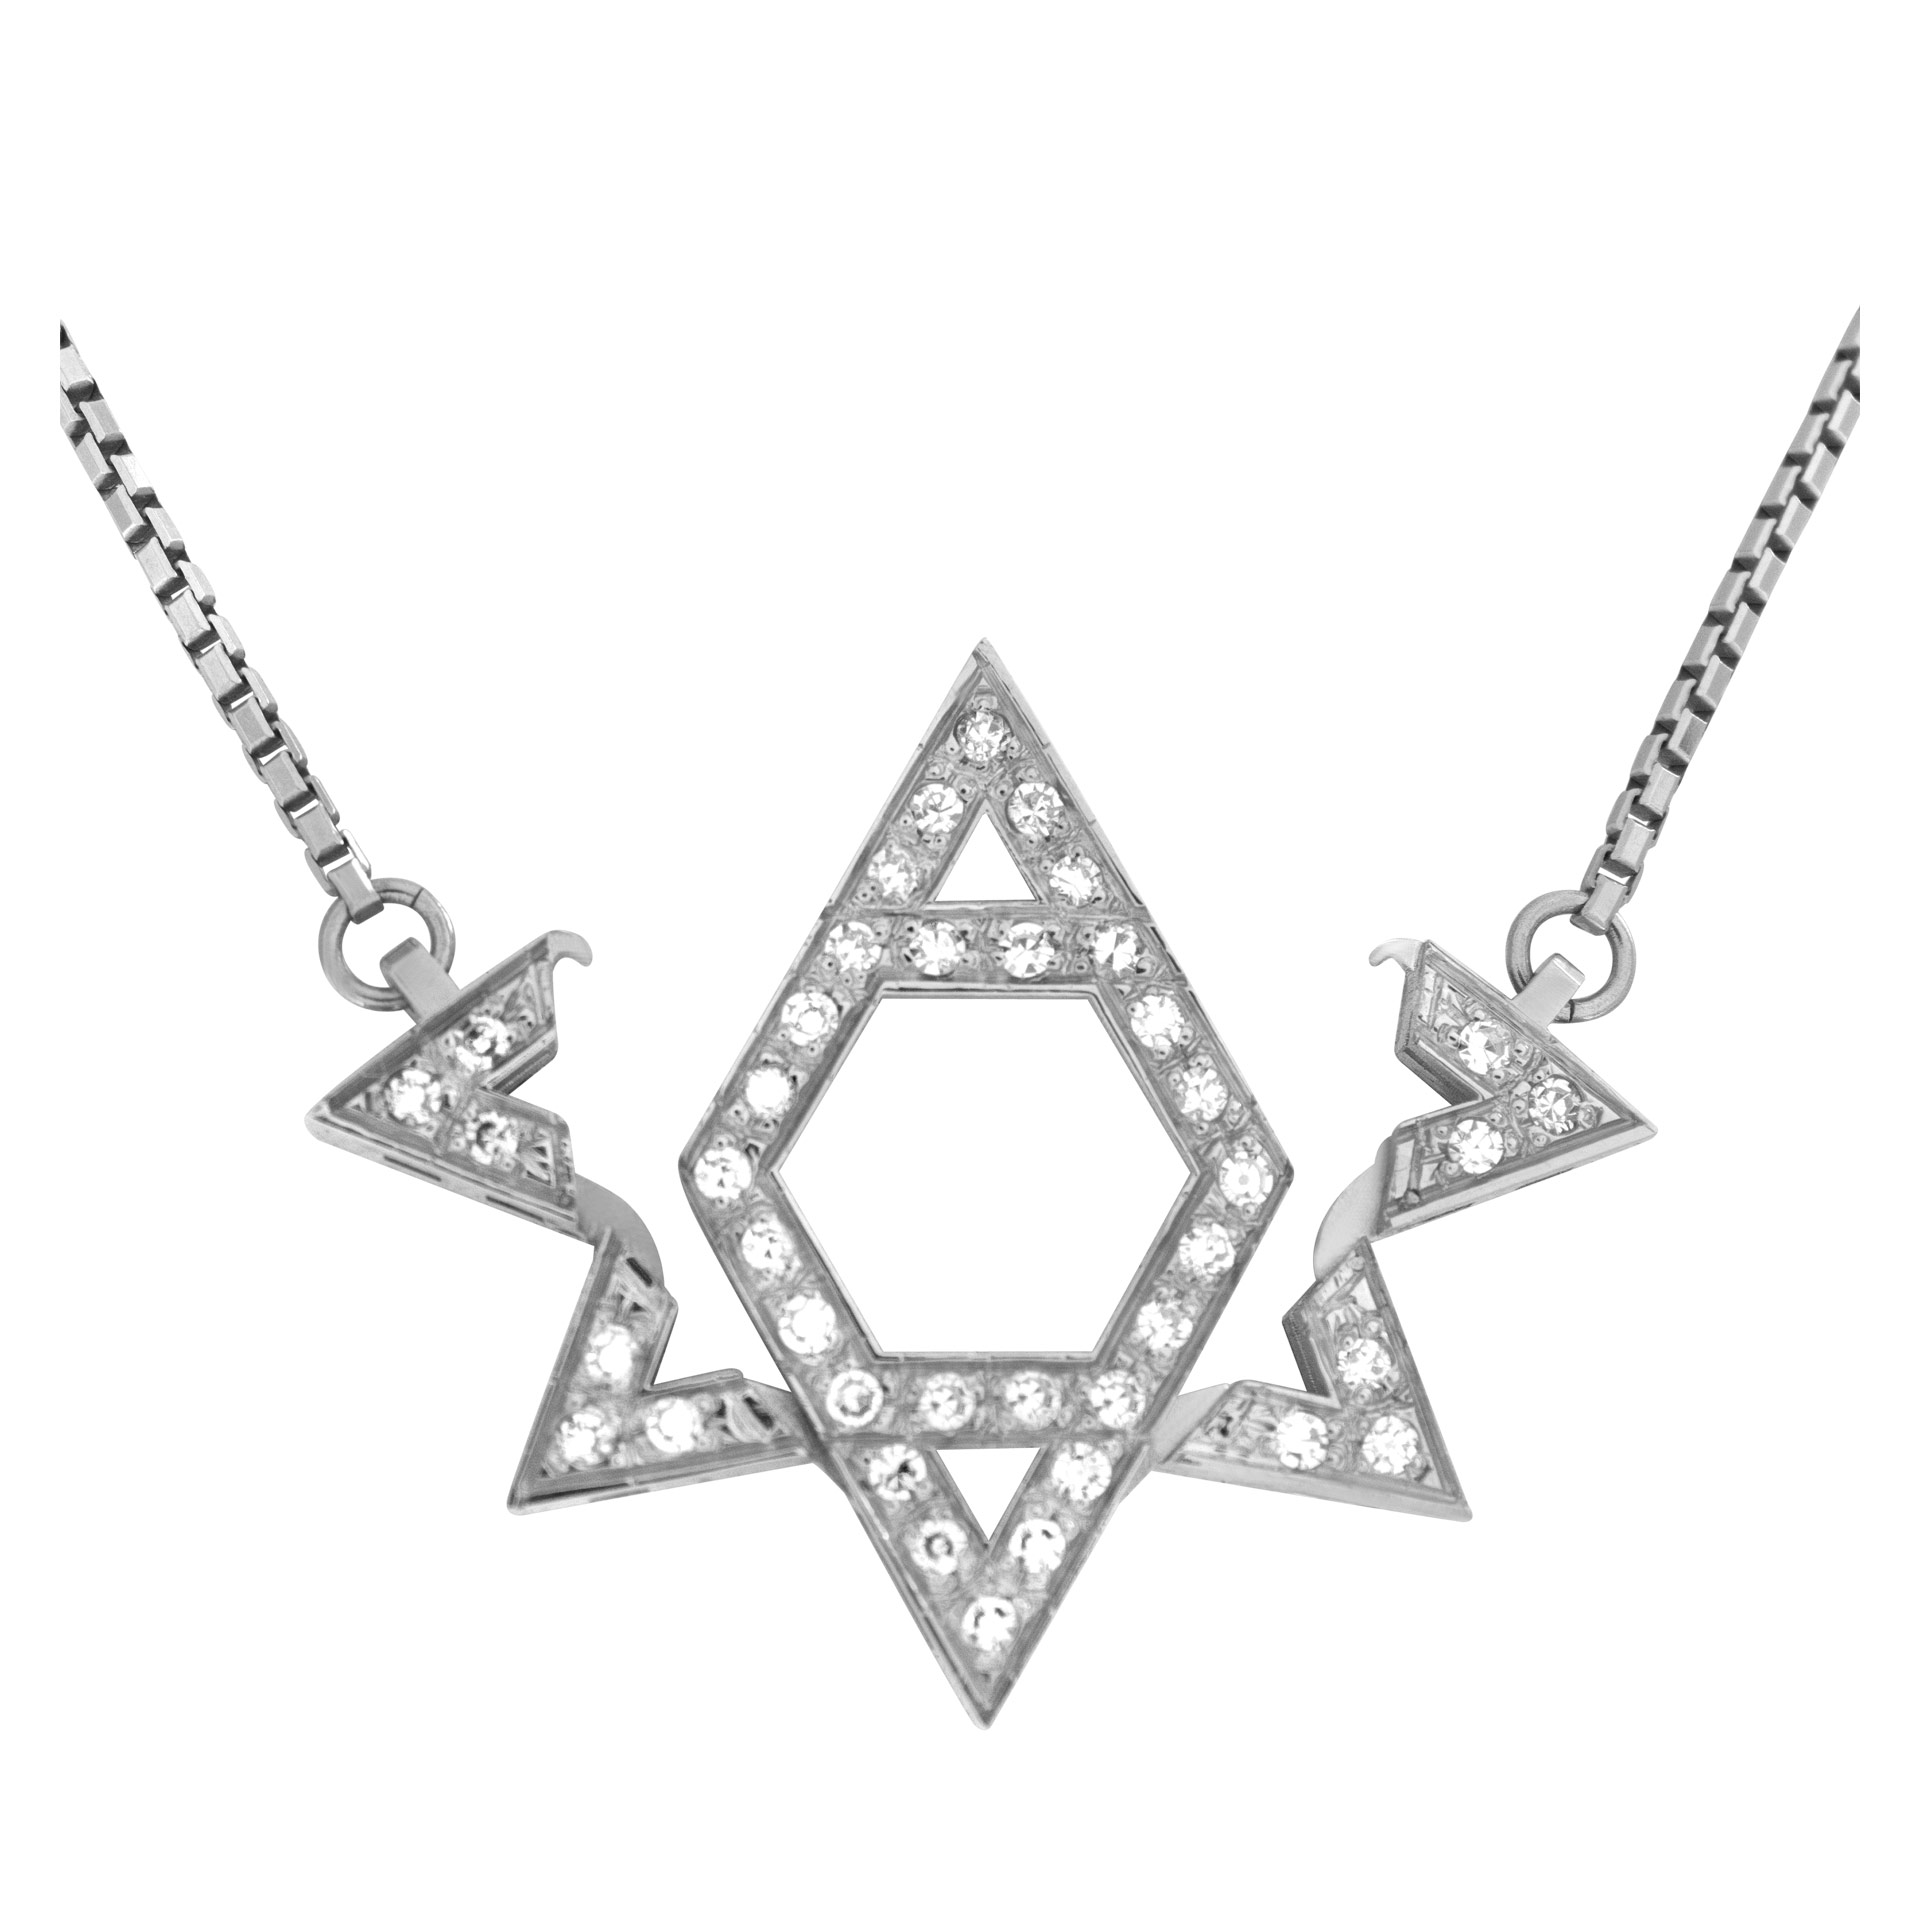 "Star of David" pendant with approximately 0.75 carat pave diamonds set in 18k white gold image 4